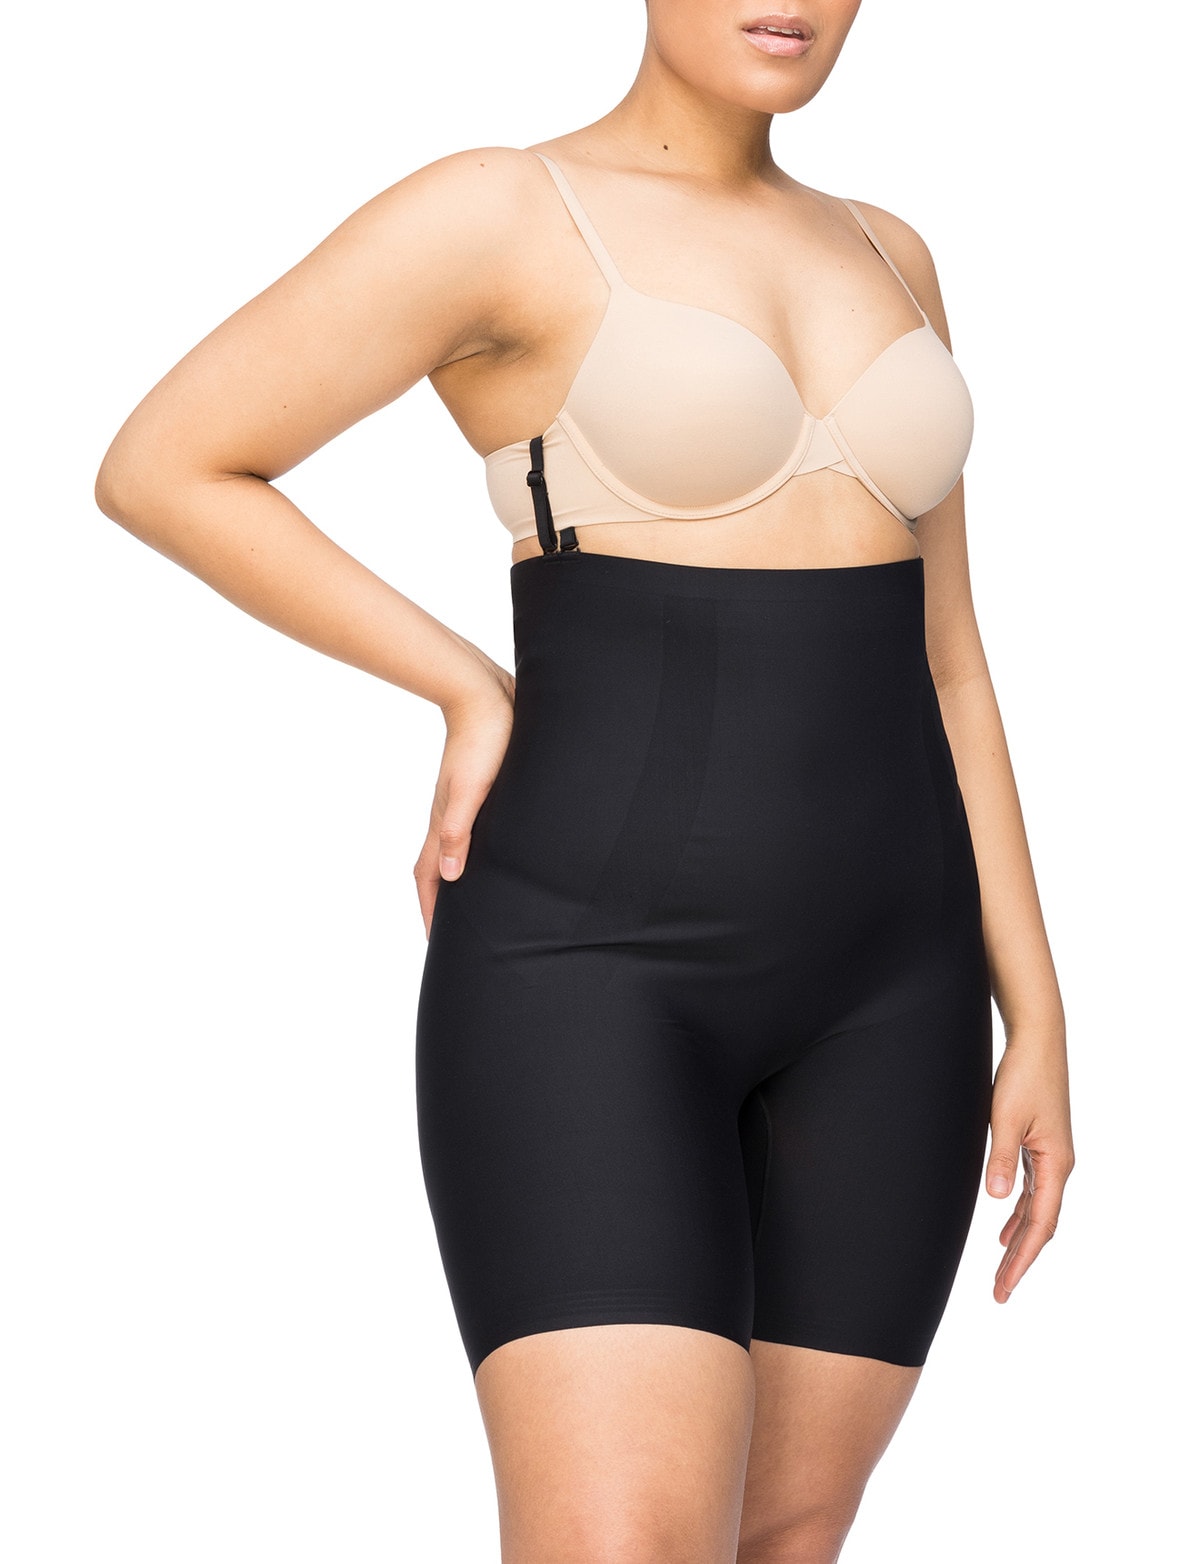 Farmers - Accentuate your curves this Valentine's Day with a little help  from the Sweeping Curves Slip from Nancy Ganz. Shop now:   #LingerieatFarmers